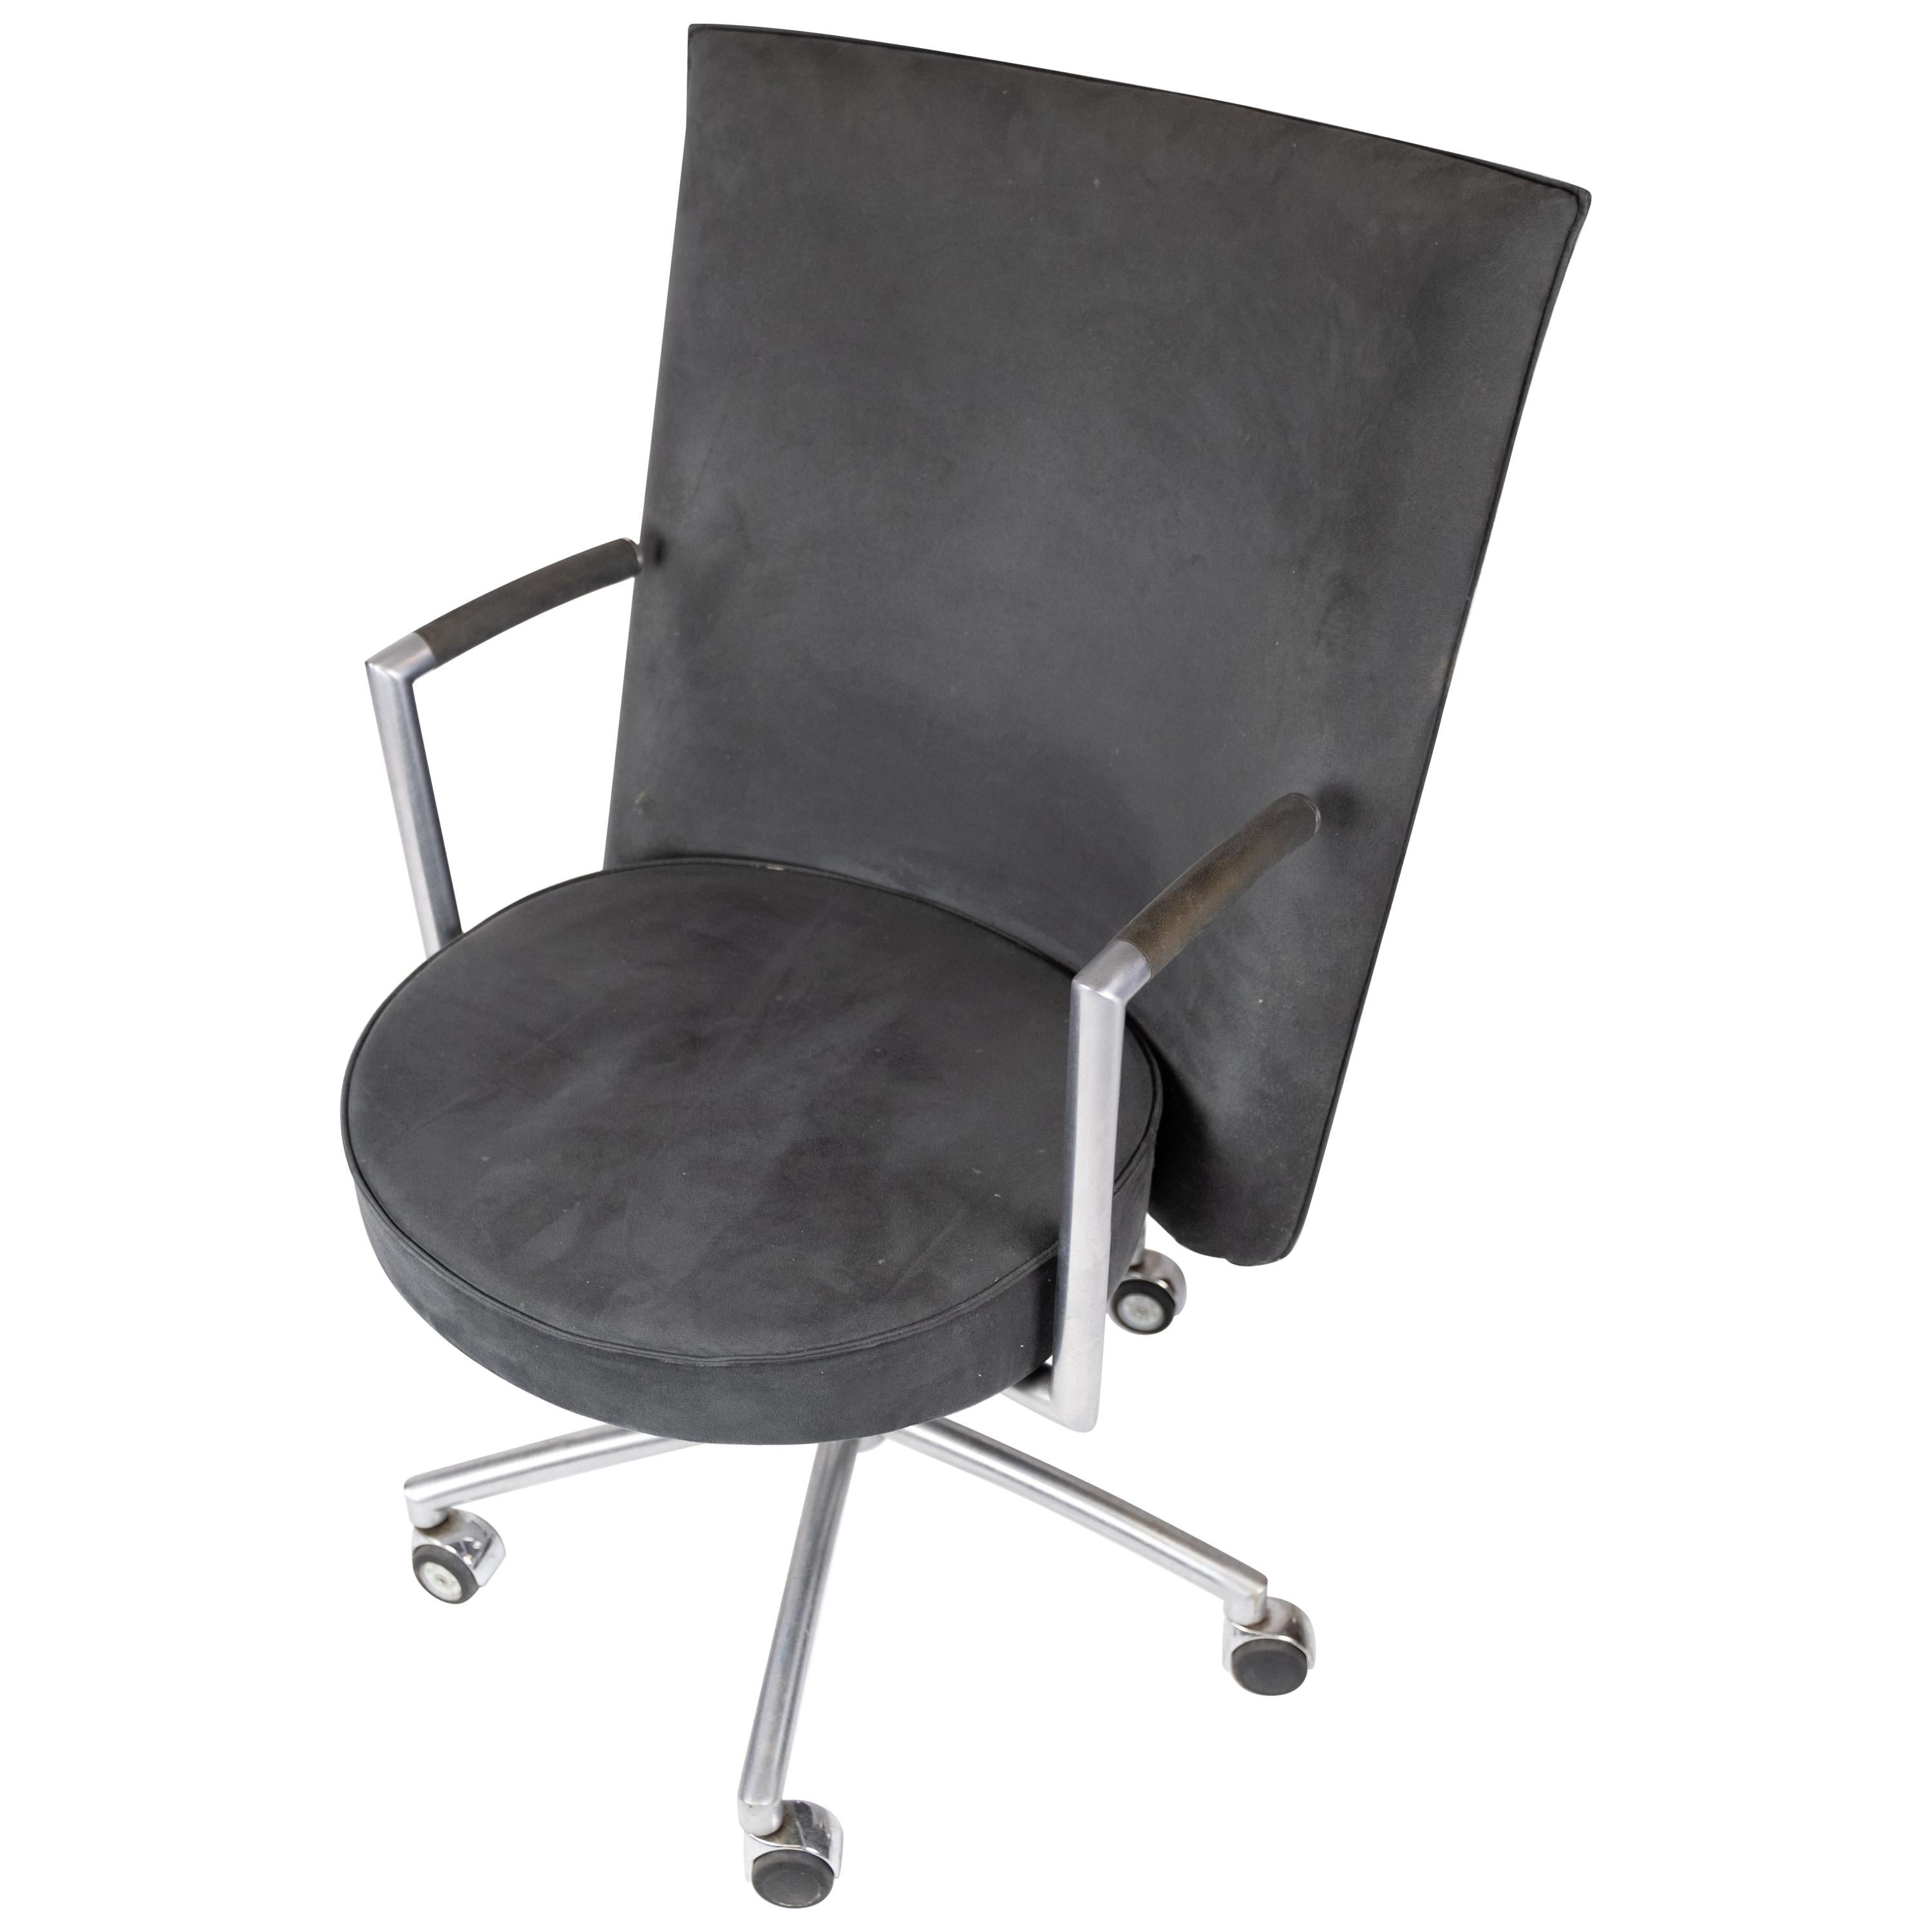 Office Chair, Model EJ70, Upholstered with Dark Grey Fabric by Johannes Foersom